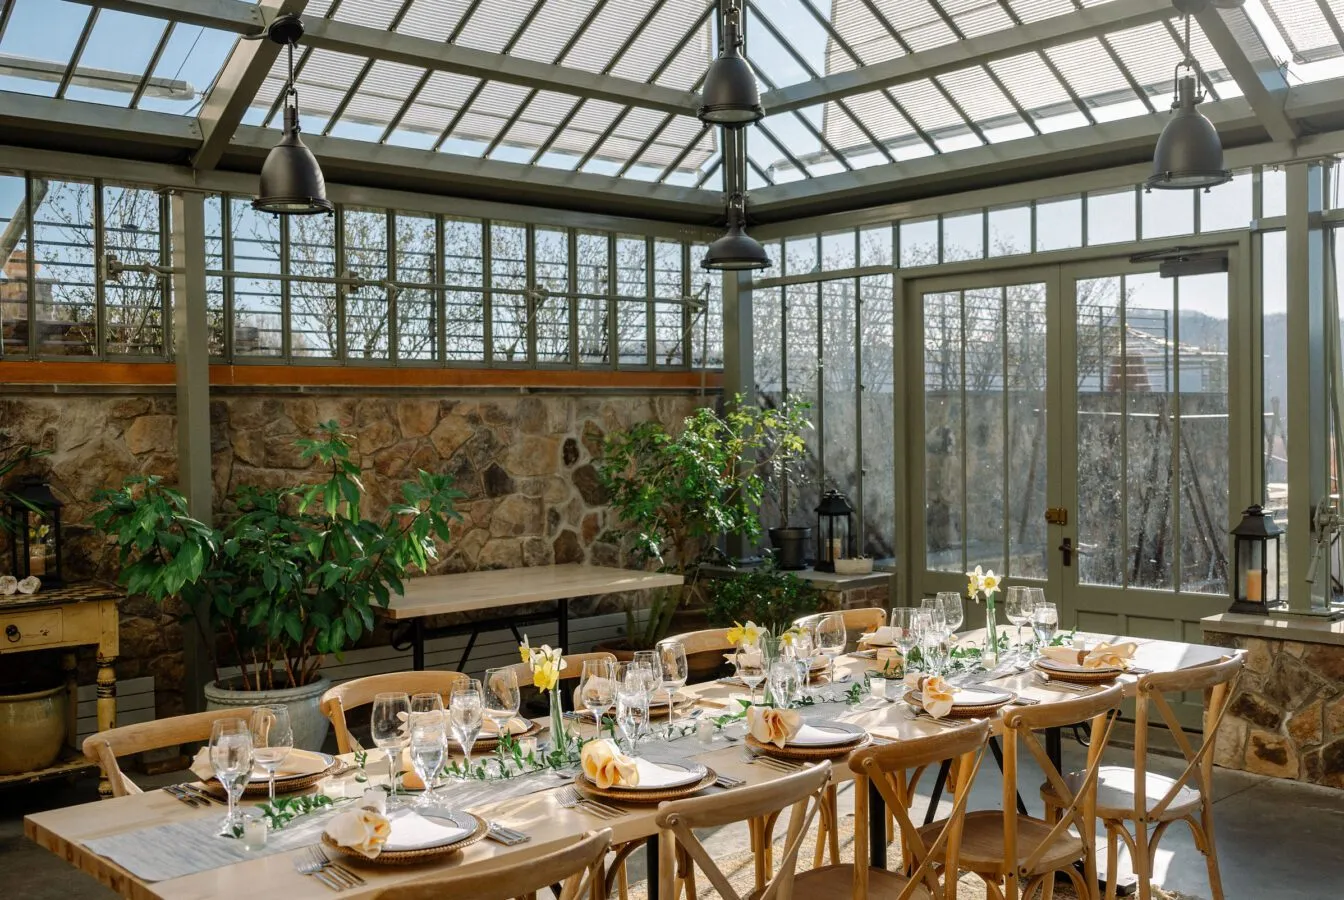 Vintner's Table in the Greenhouse